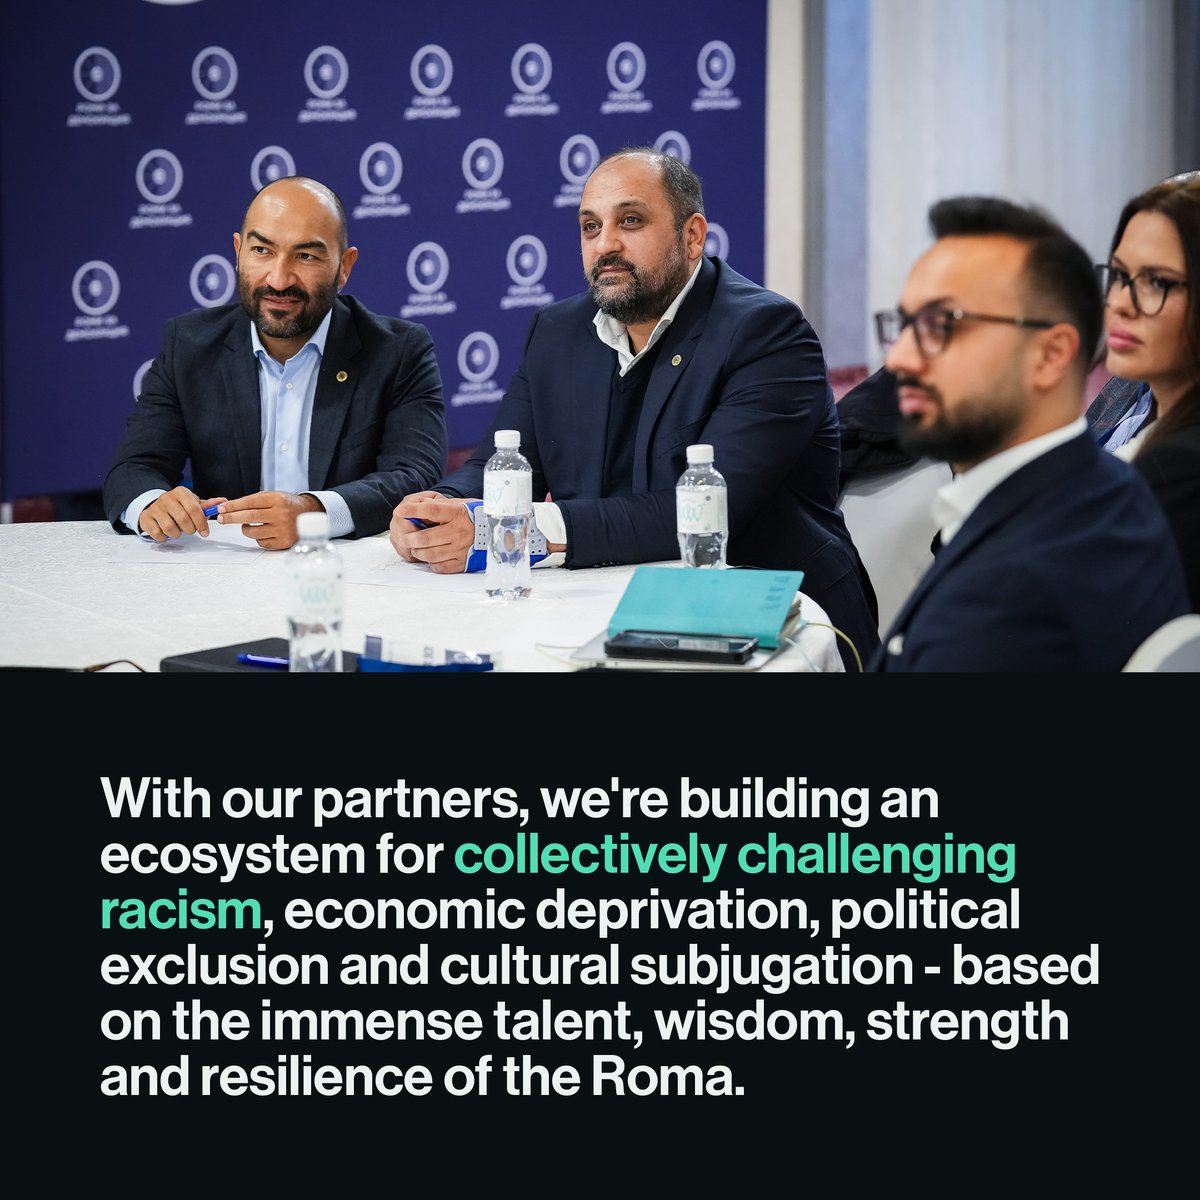 Together with our network of Roma-led organizations, we are working to change the way Roma are viewed, to realize their potential and to develop solutions that benefit both the Roma and European economies. Read more about us at the link in our bio. #romaforeurope